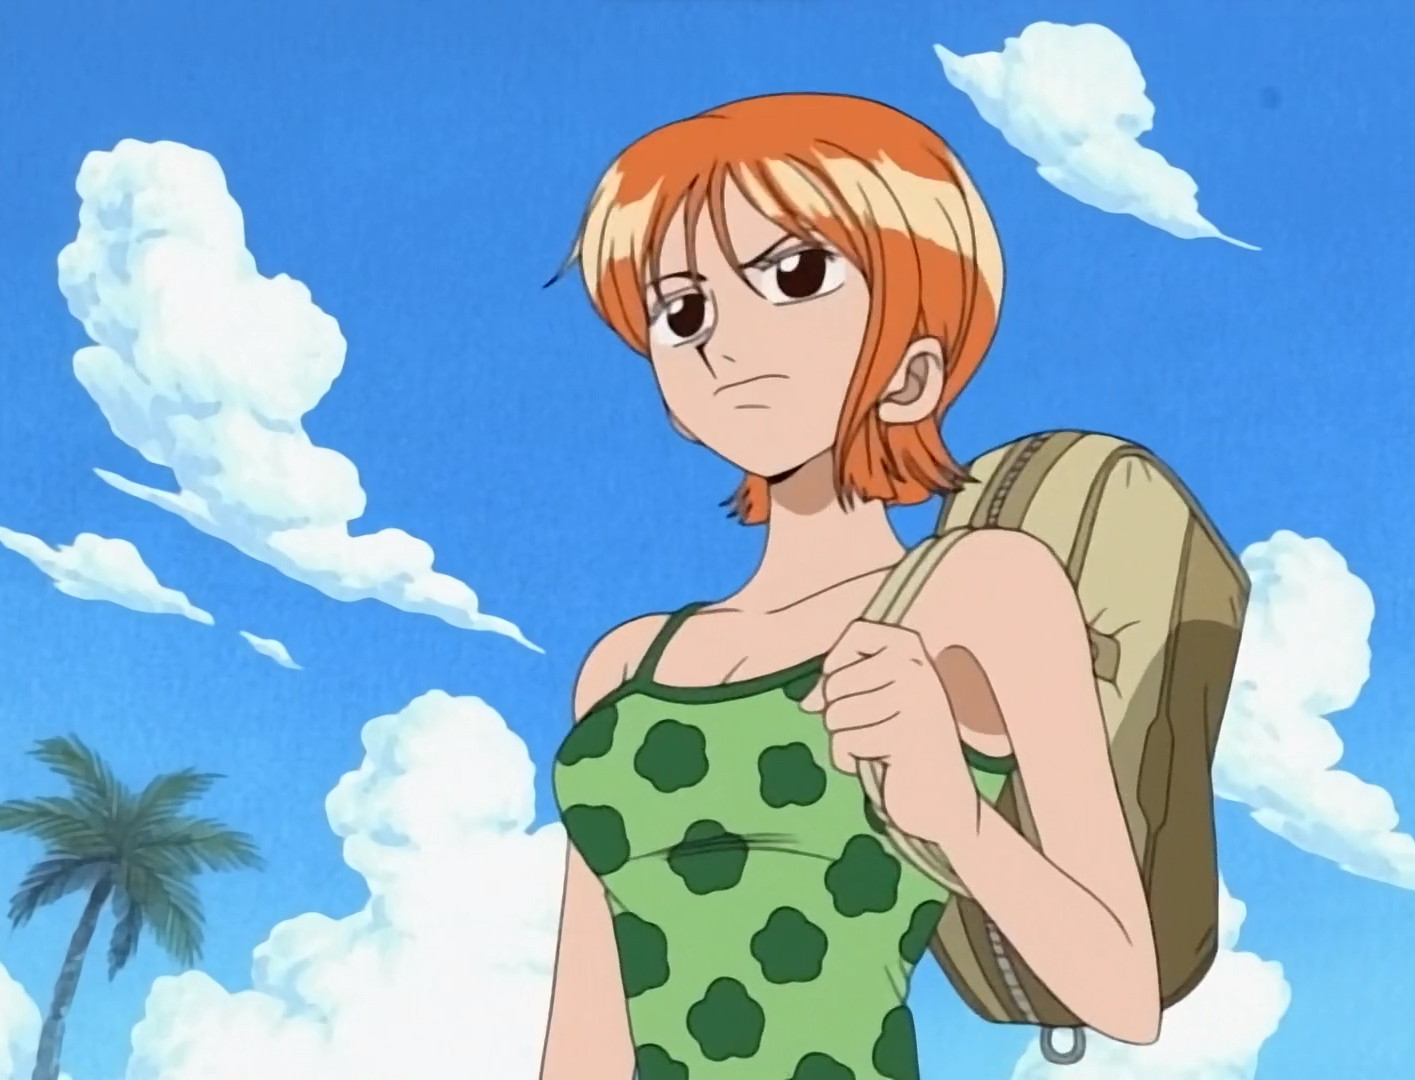 One Piece Nami Finally arrives back into her home village with the straw hats treasures